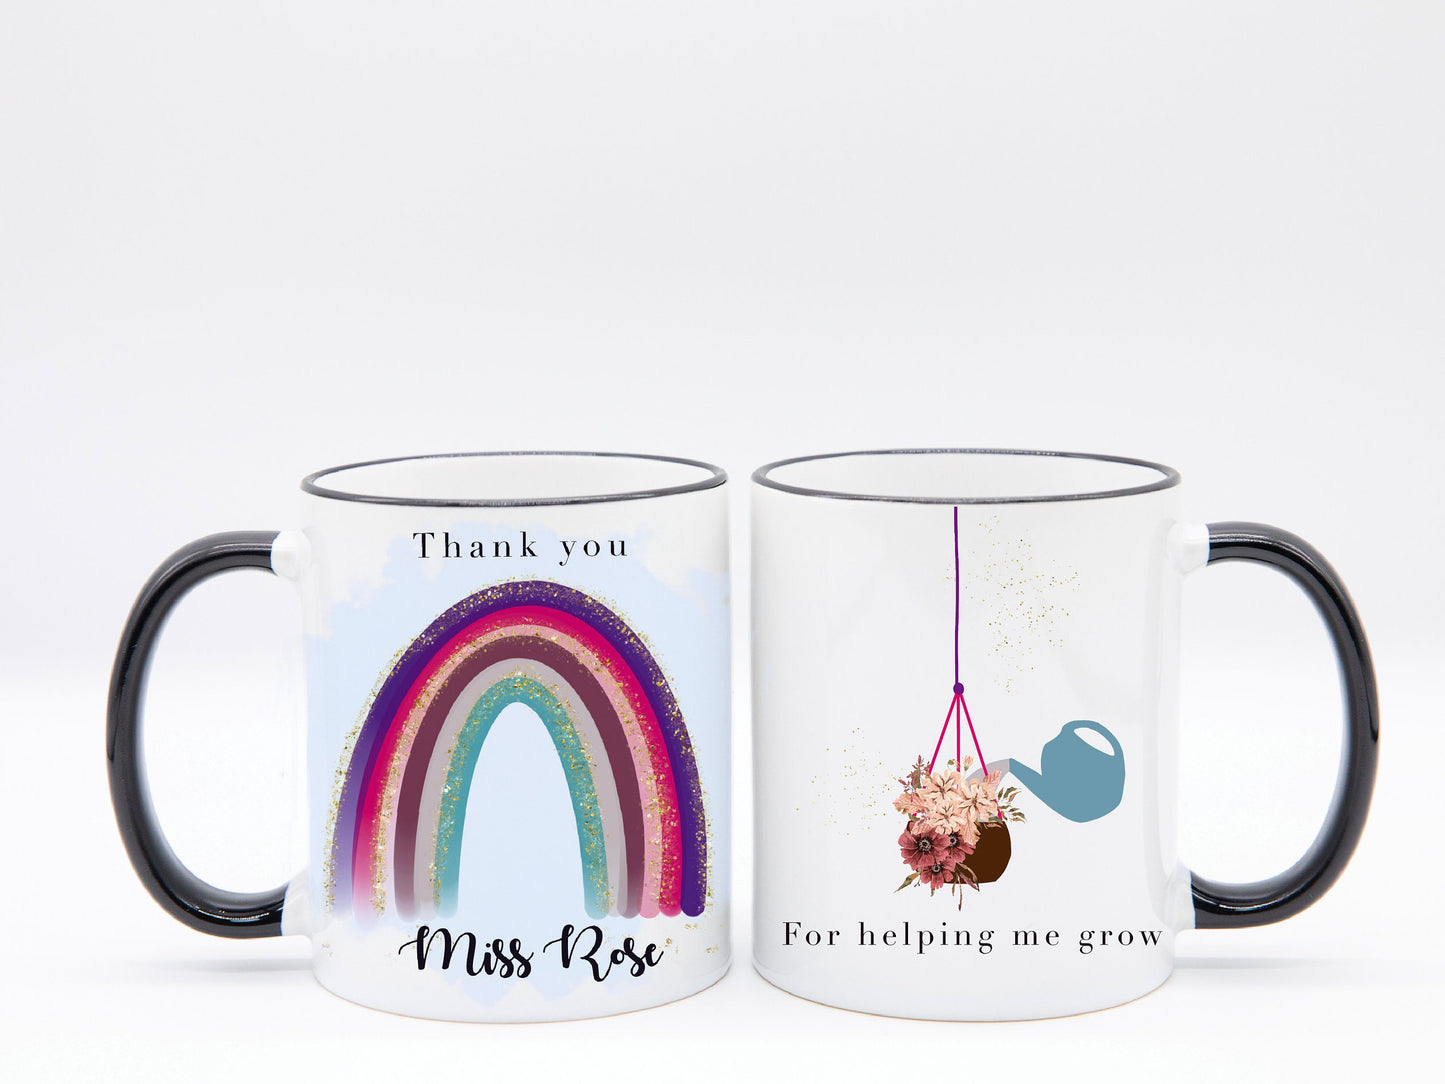 Personalised Mug for Teachers | End of year gift